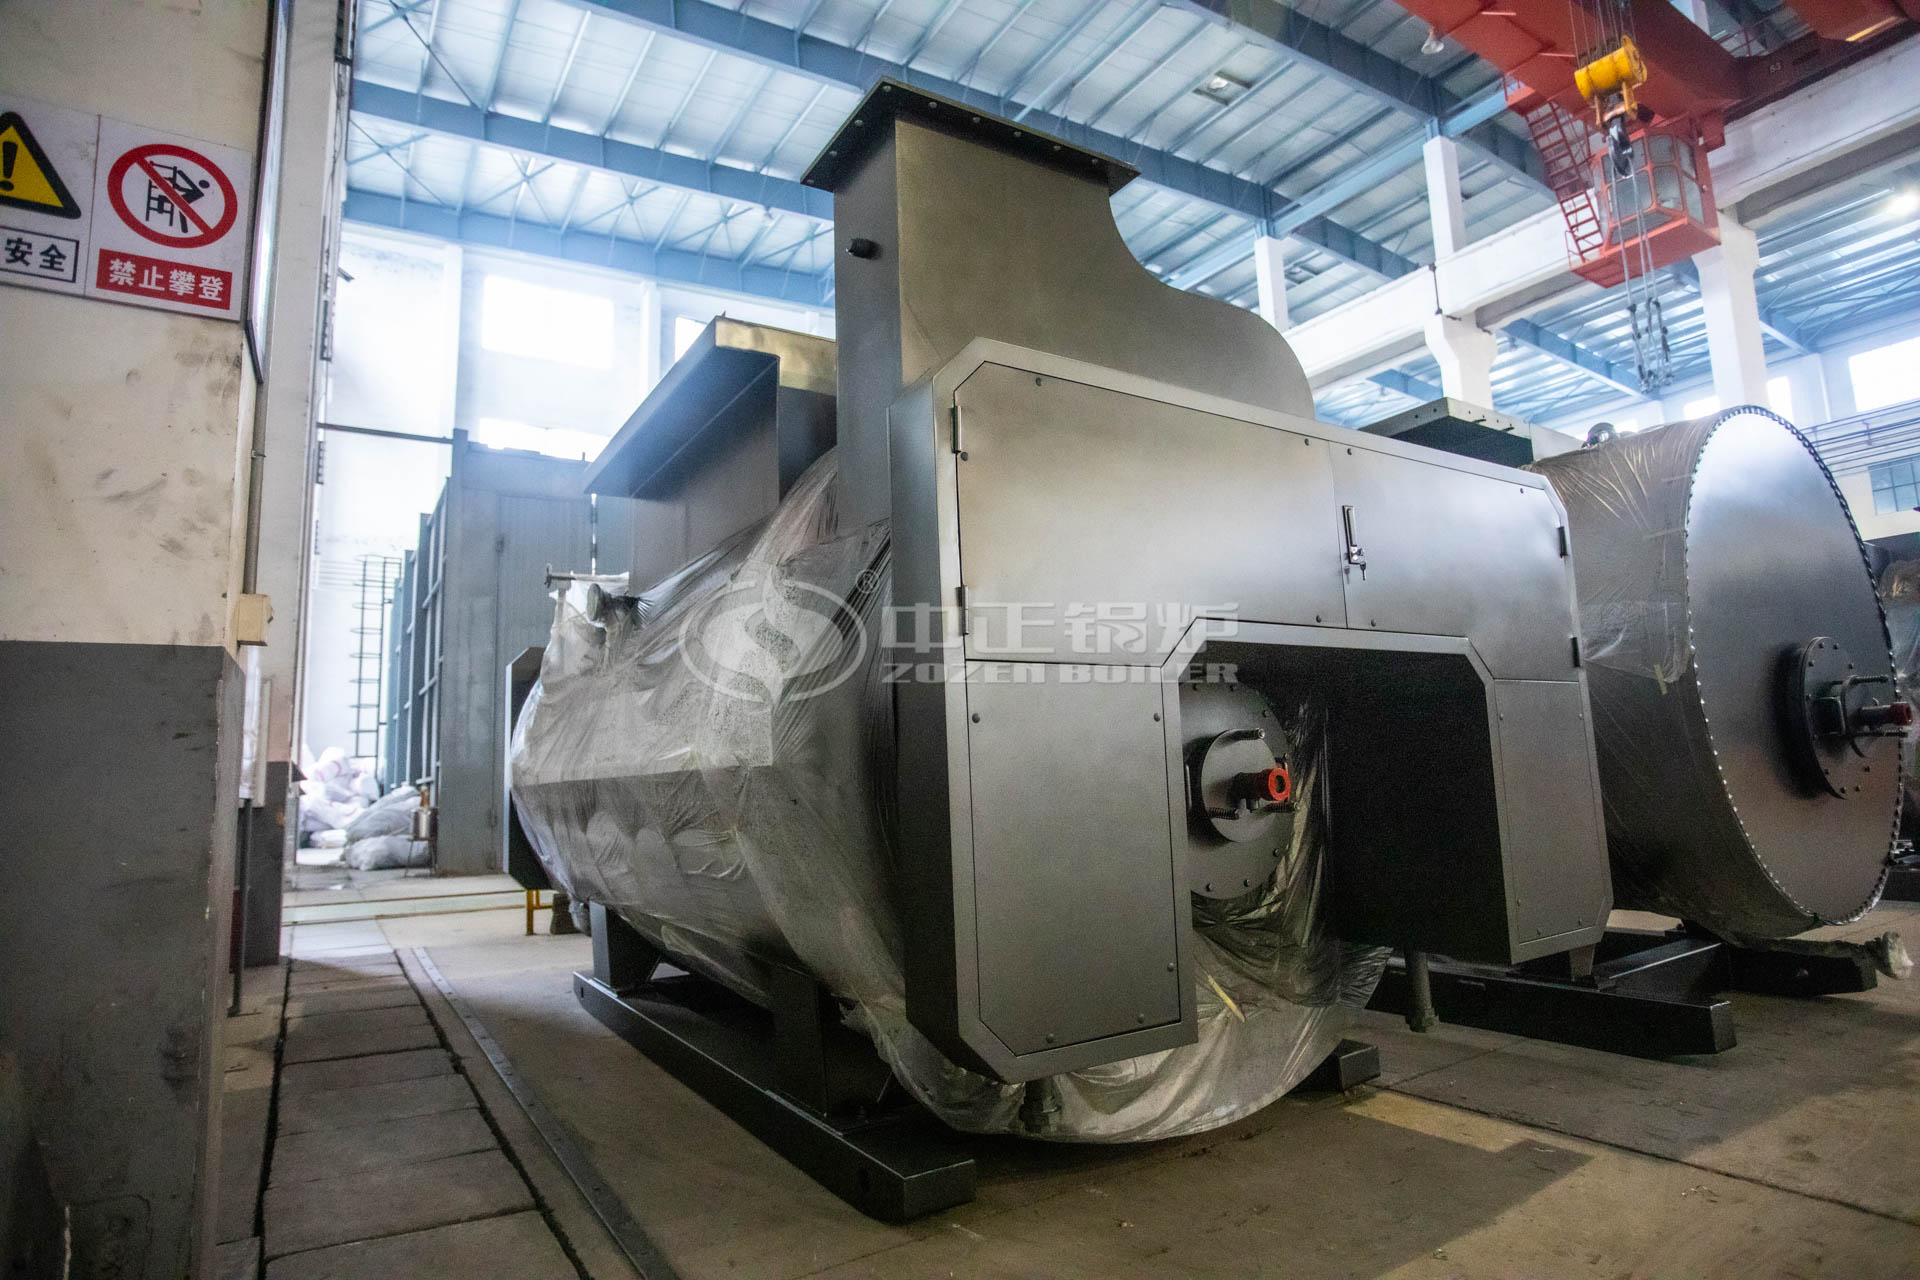 Factors Influencing 3 Ton Boiler Price in the Industrial Sector